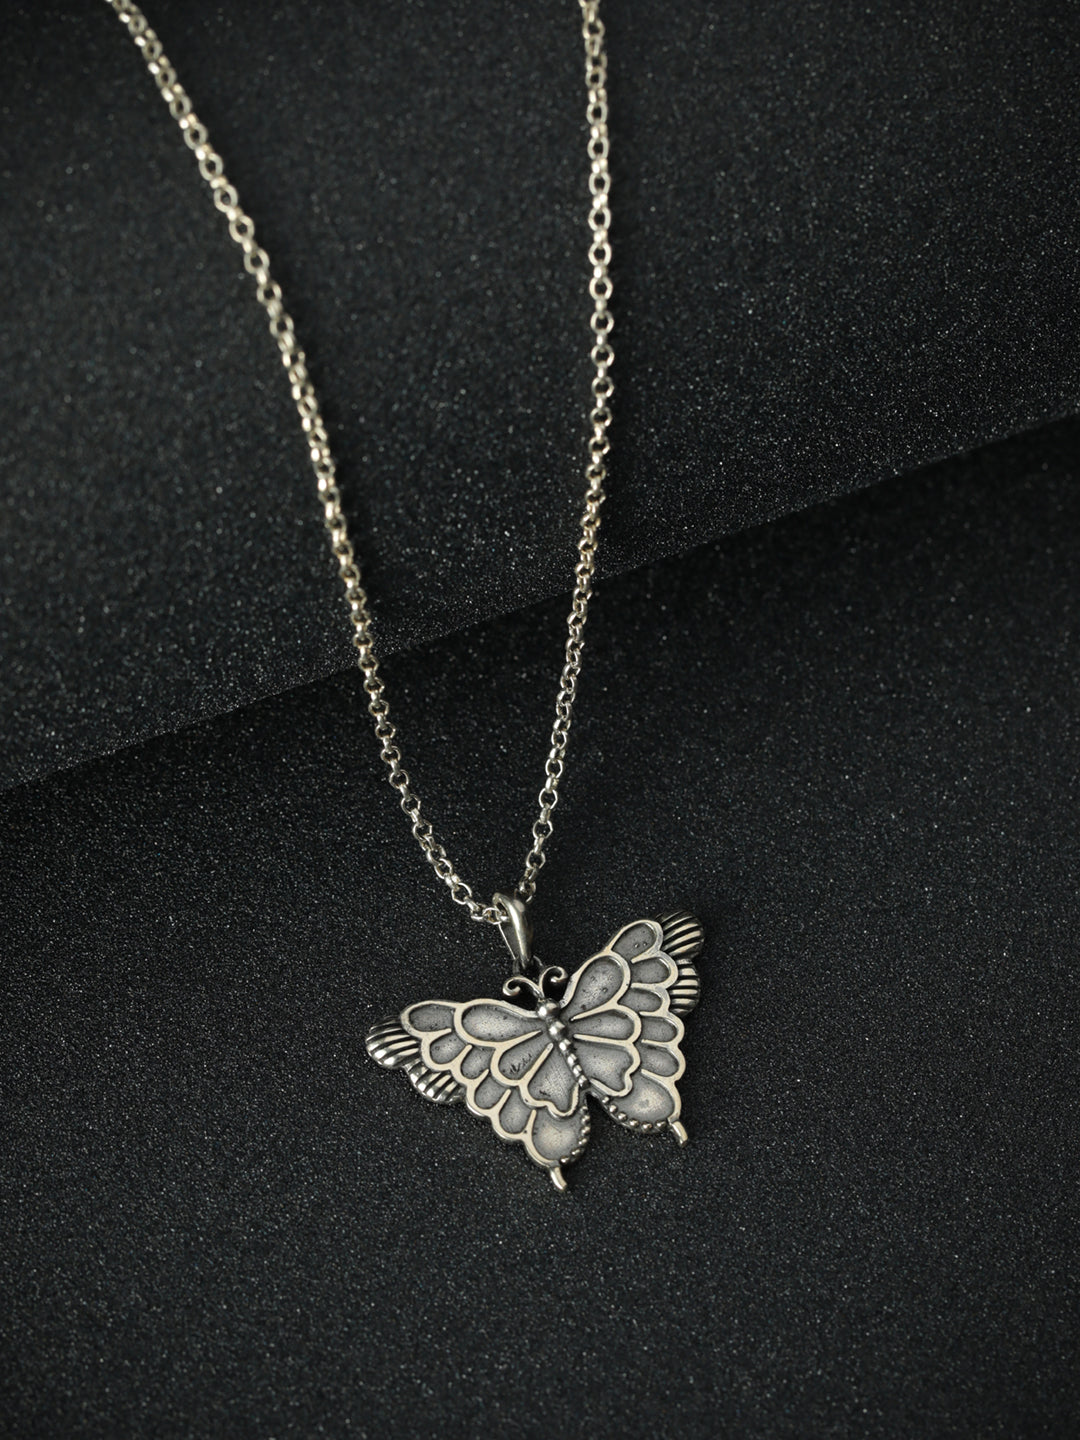 Butterfly Necklace Diamond Accents Sterling Silver | Jared